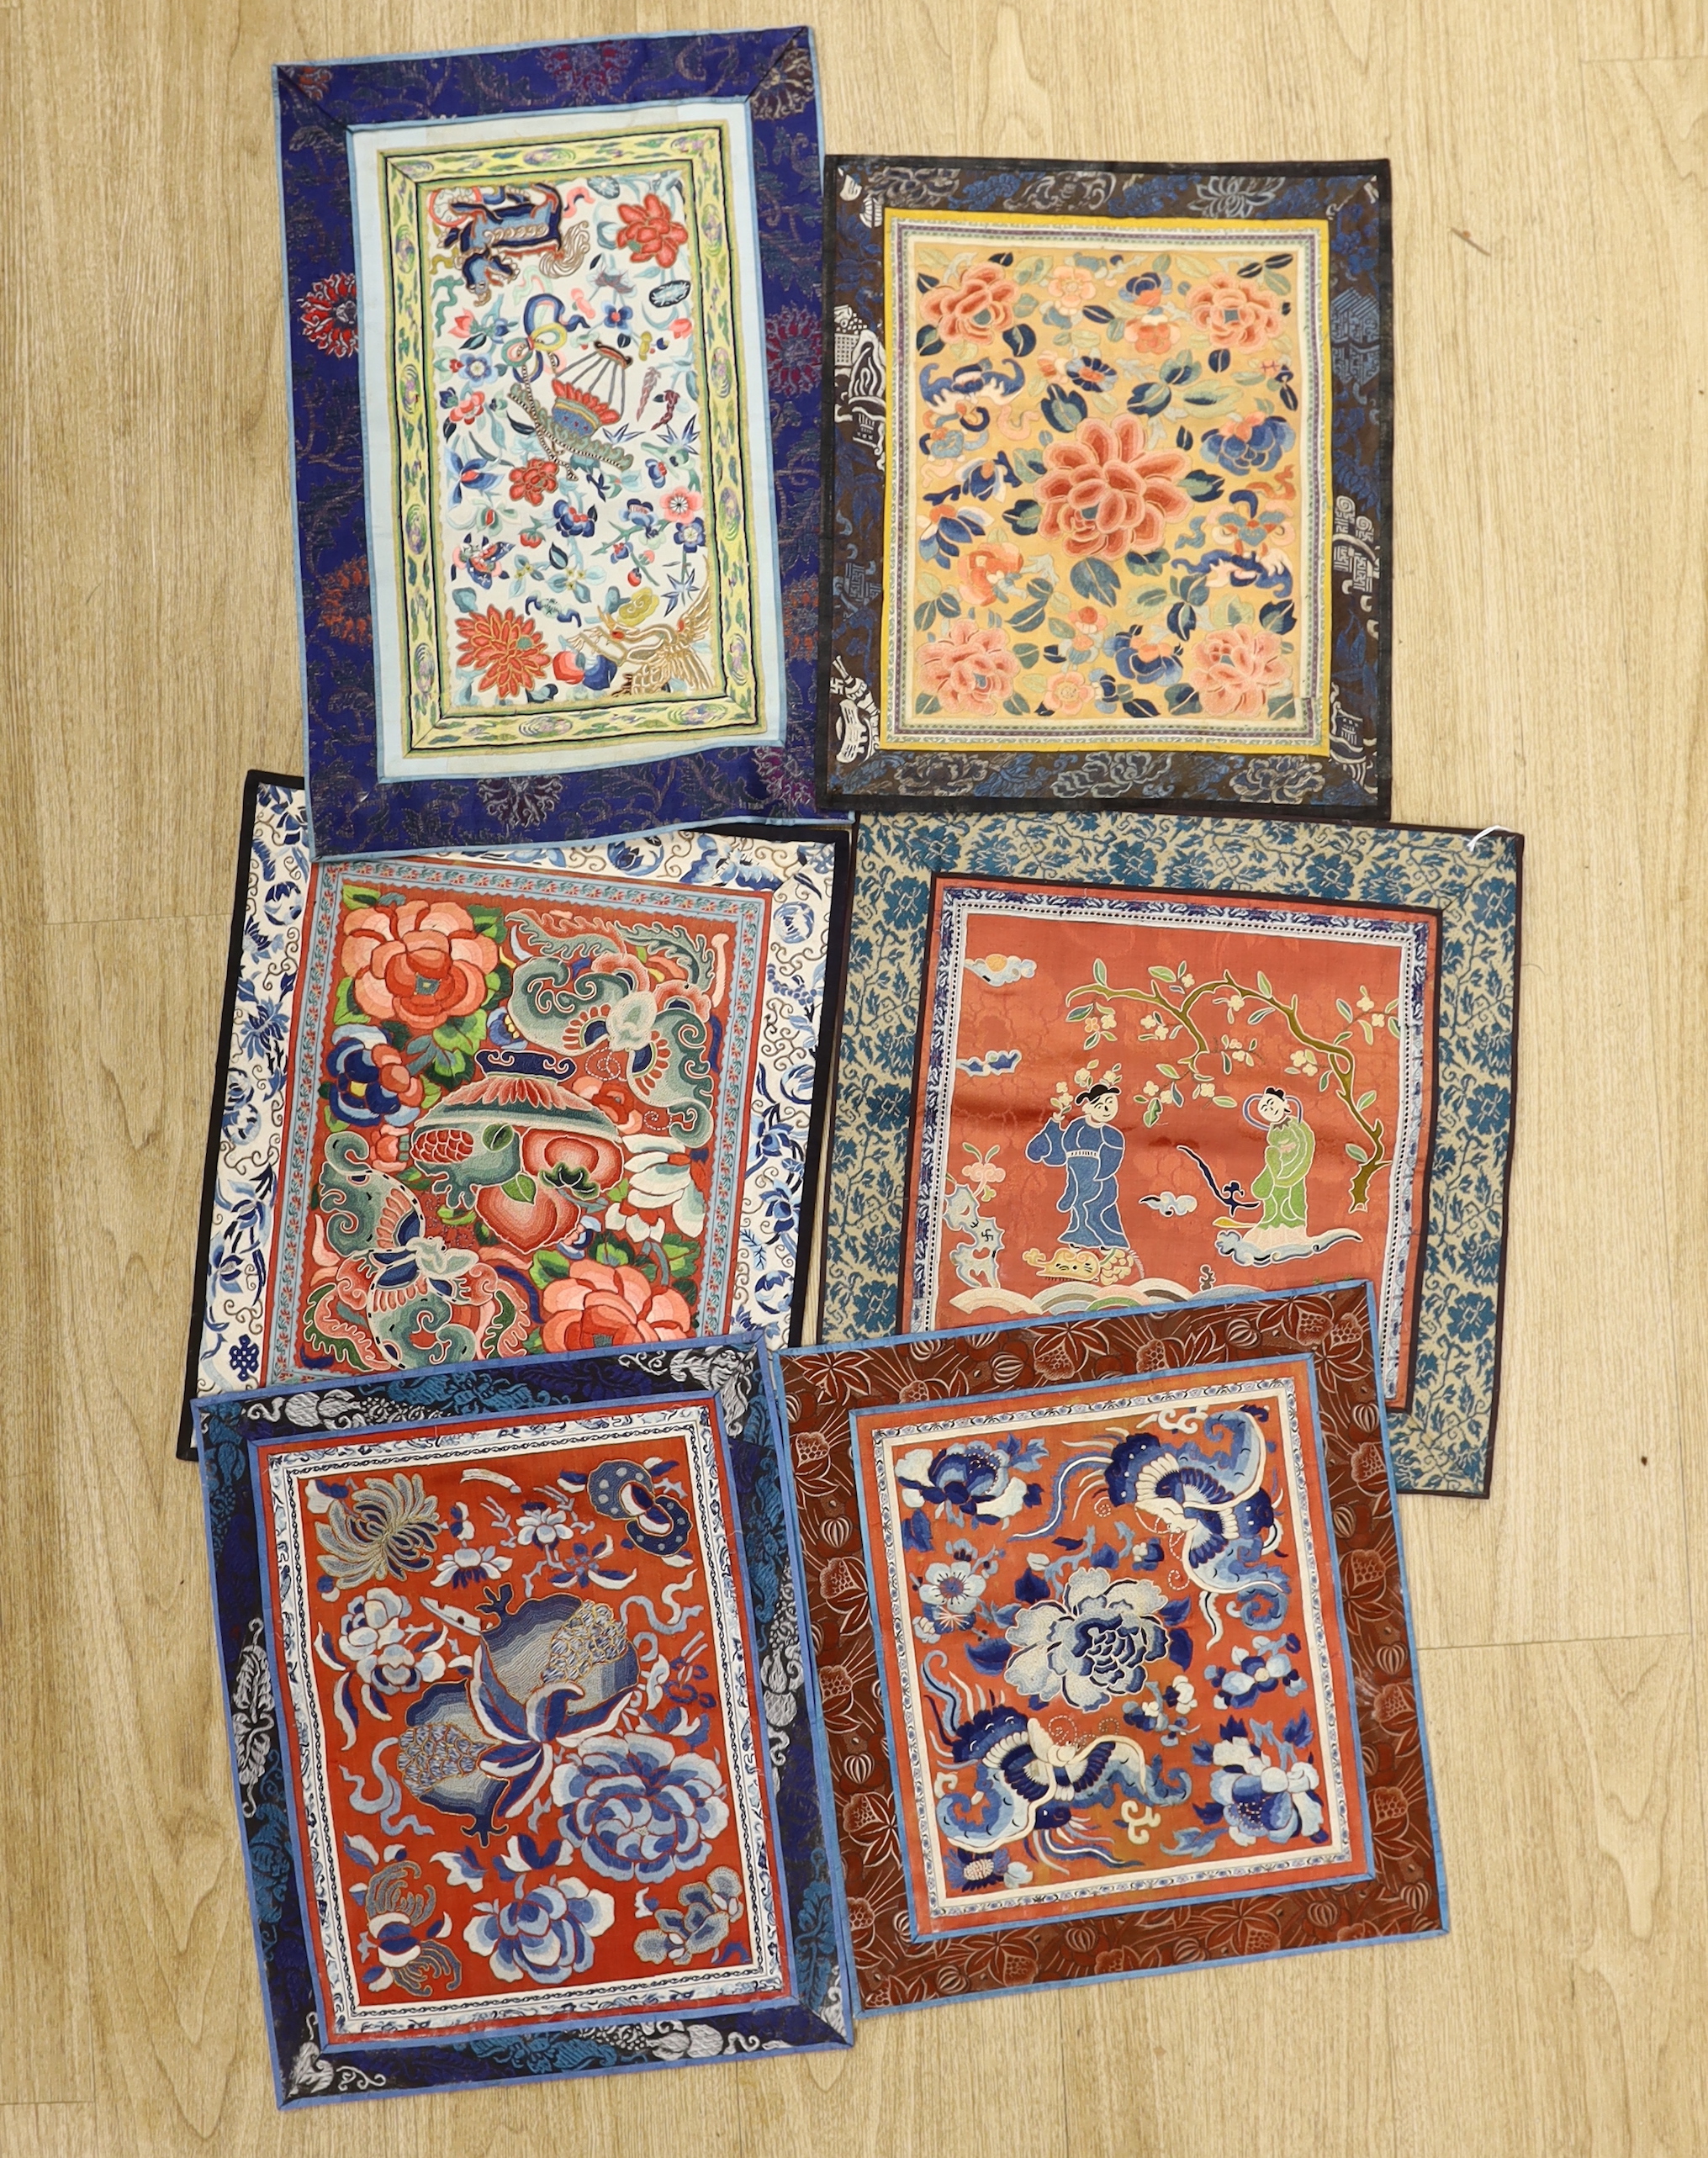 Six Chinese silk embroidered panels, embroidered with Beijing knot and stem stitch, using auspicious symbols: figures, flowers, butterflies and one with a dragon, five bordered with silk brocade, largest 48cm high x 32cm